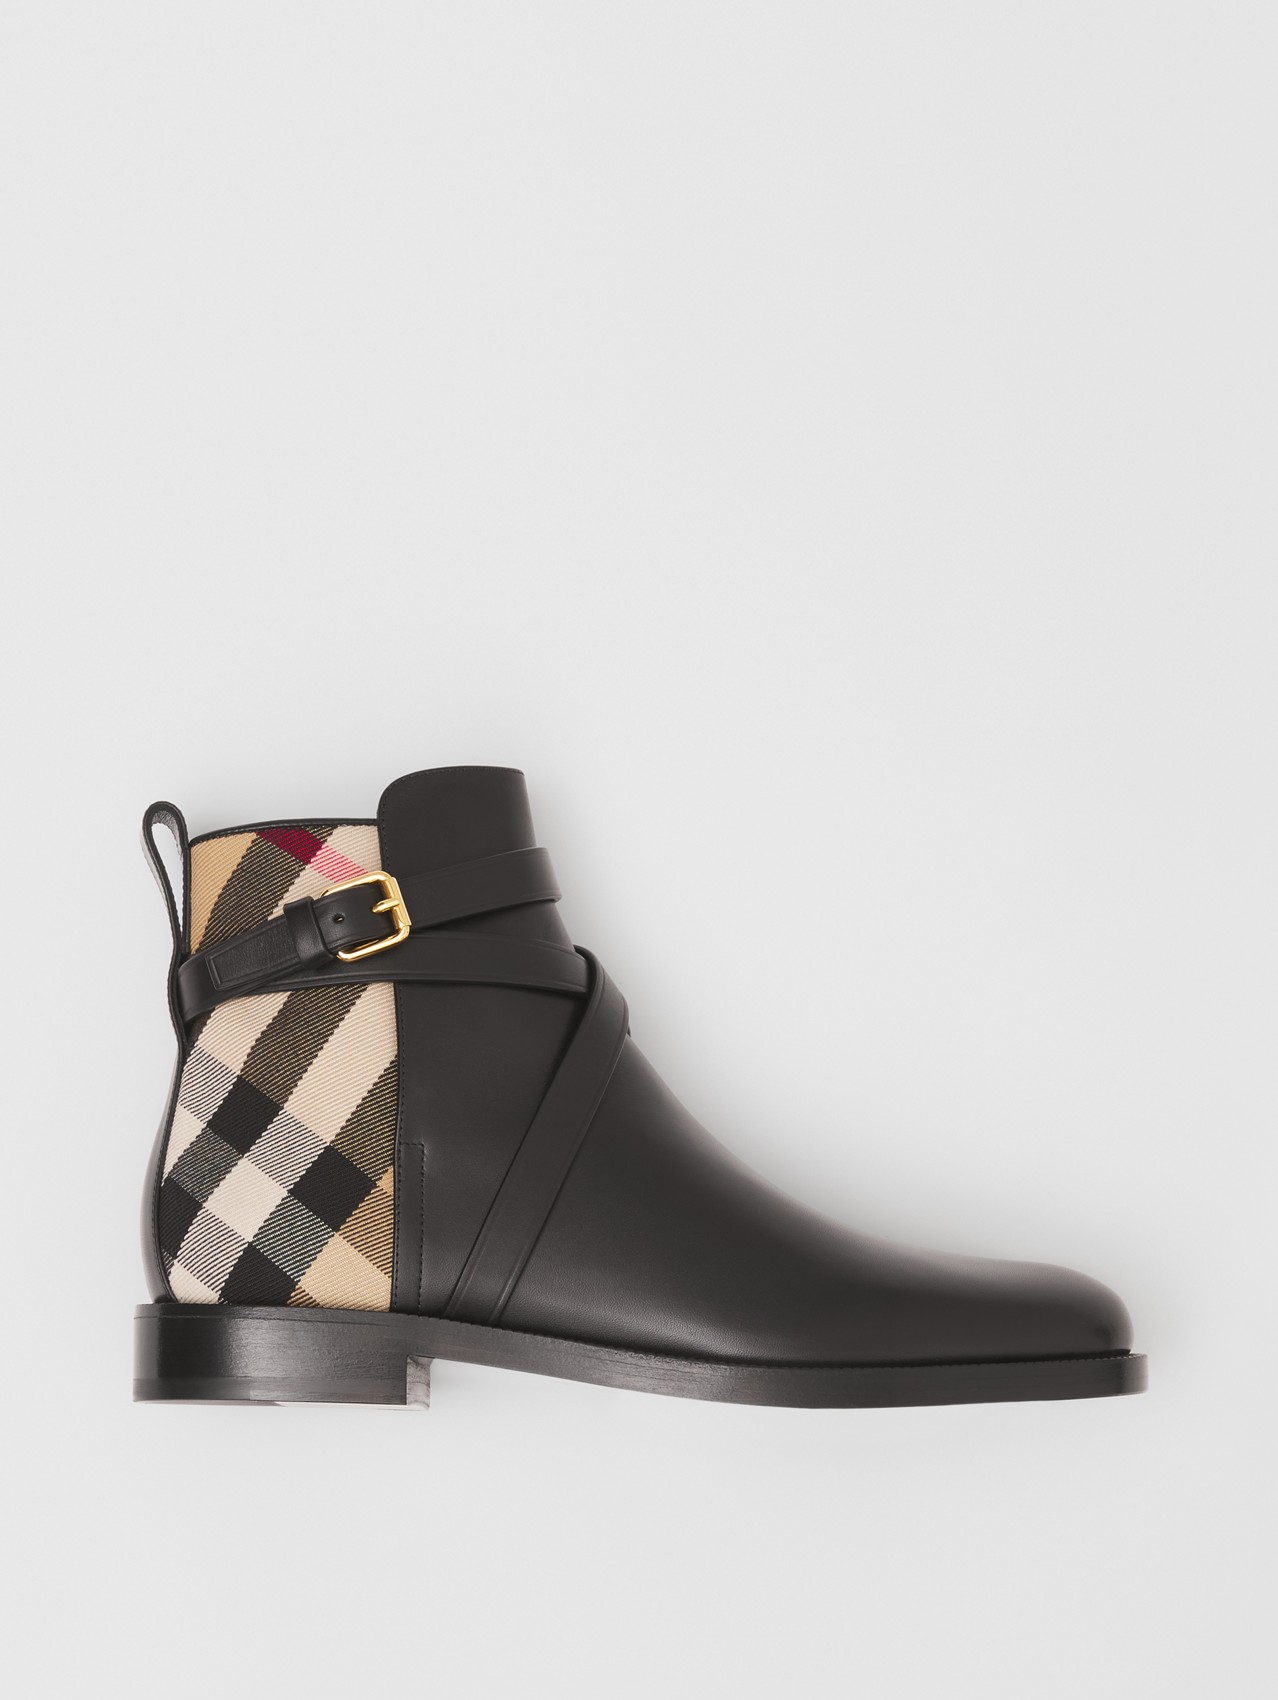 House Check and Leather Ankle Boots in Black/archive Beige